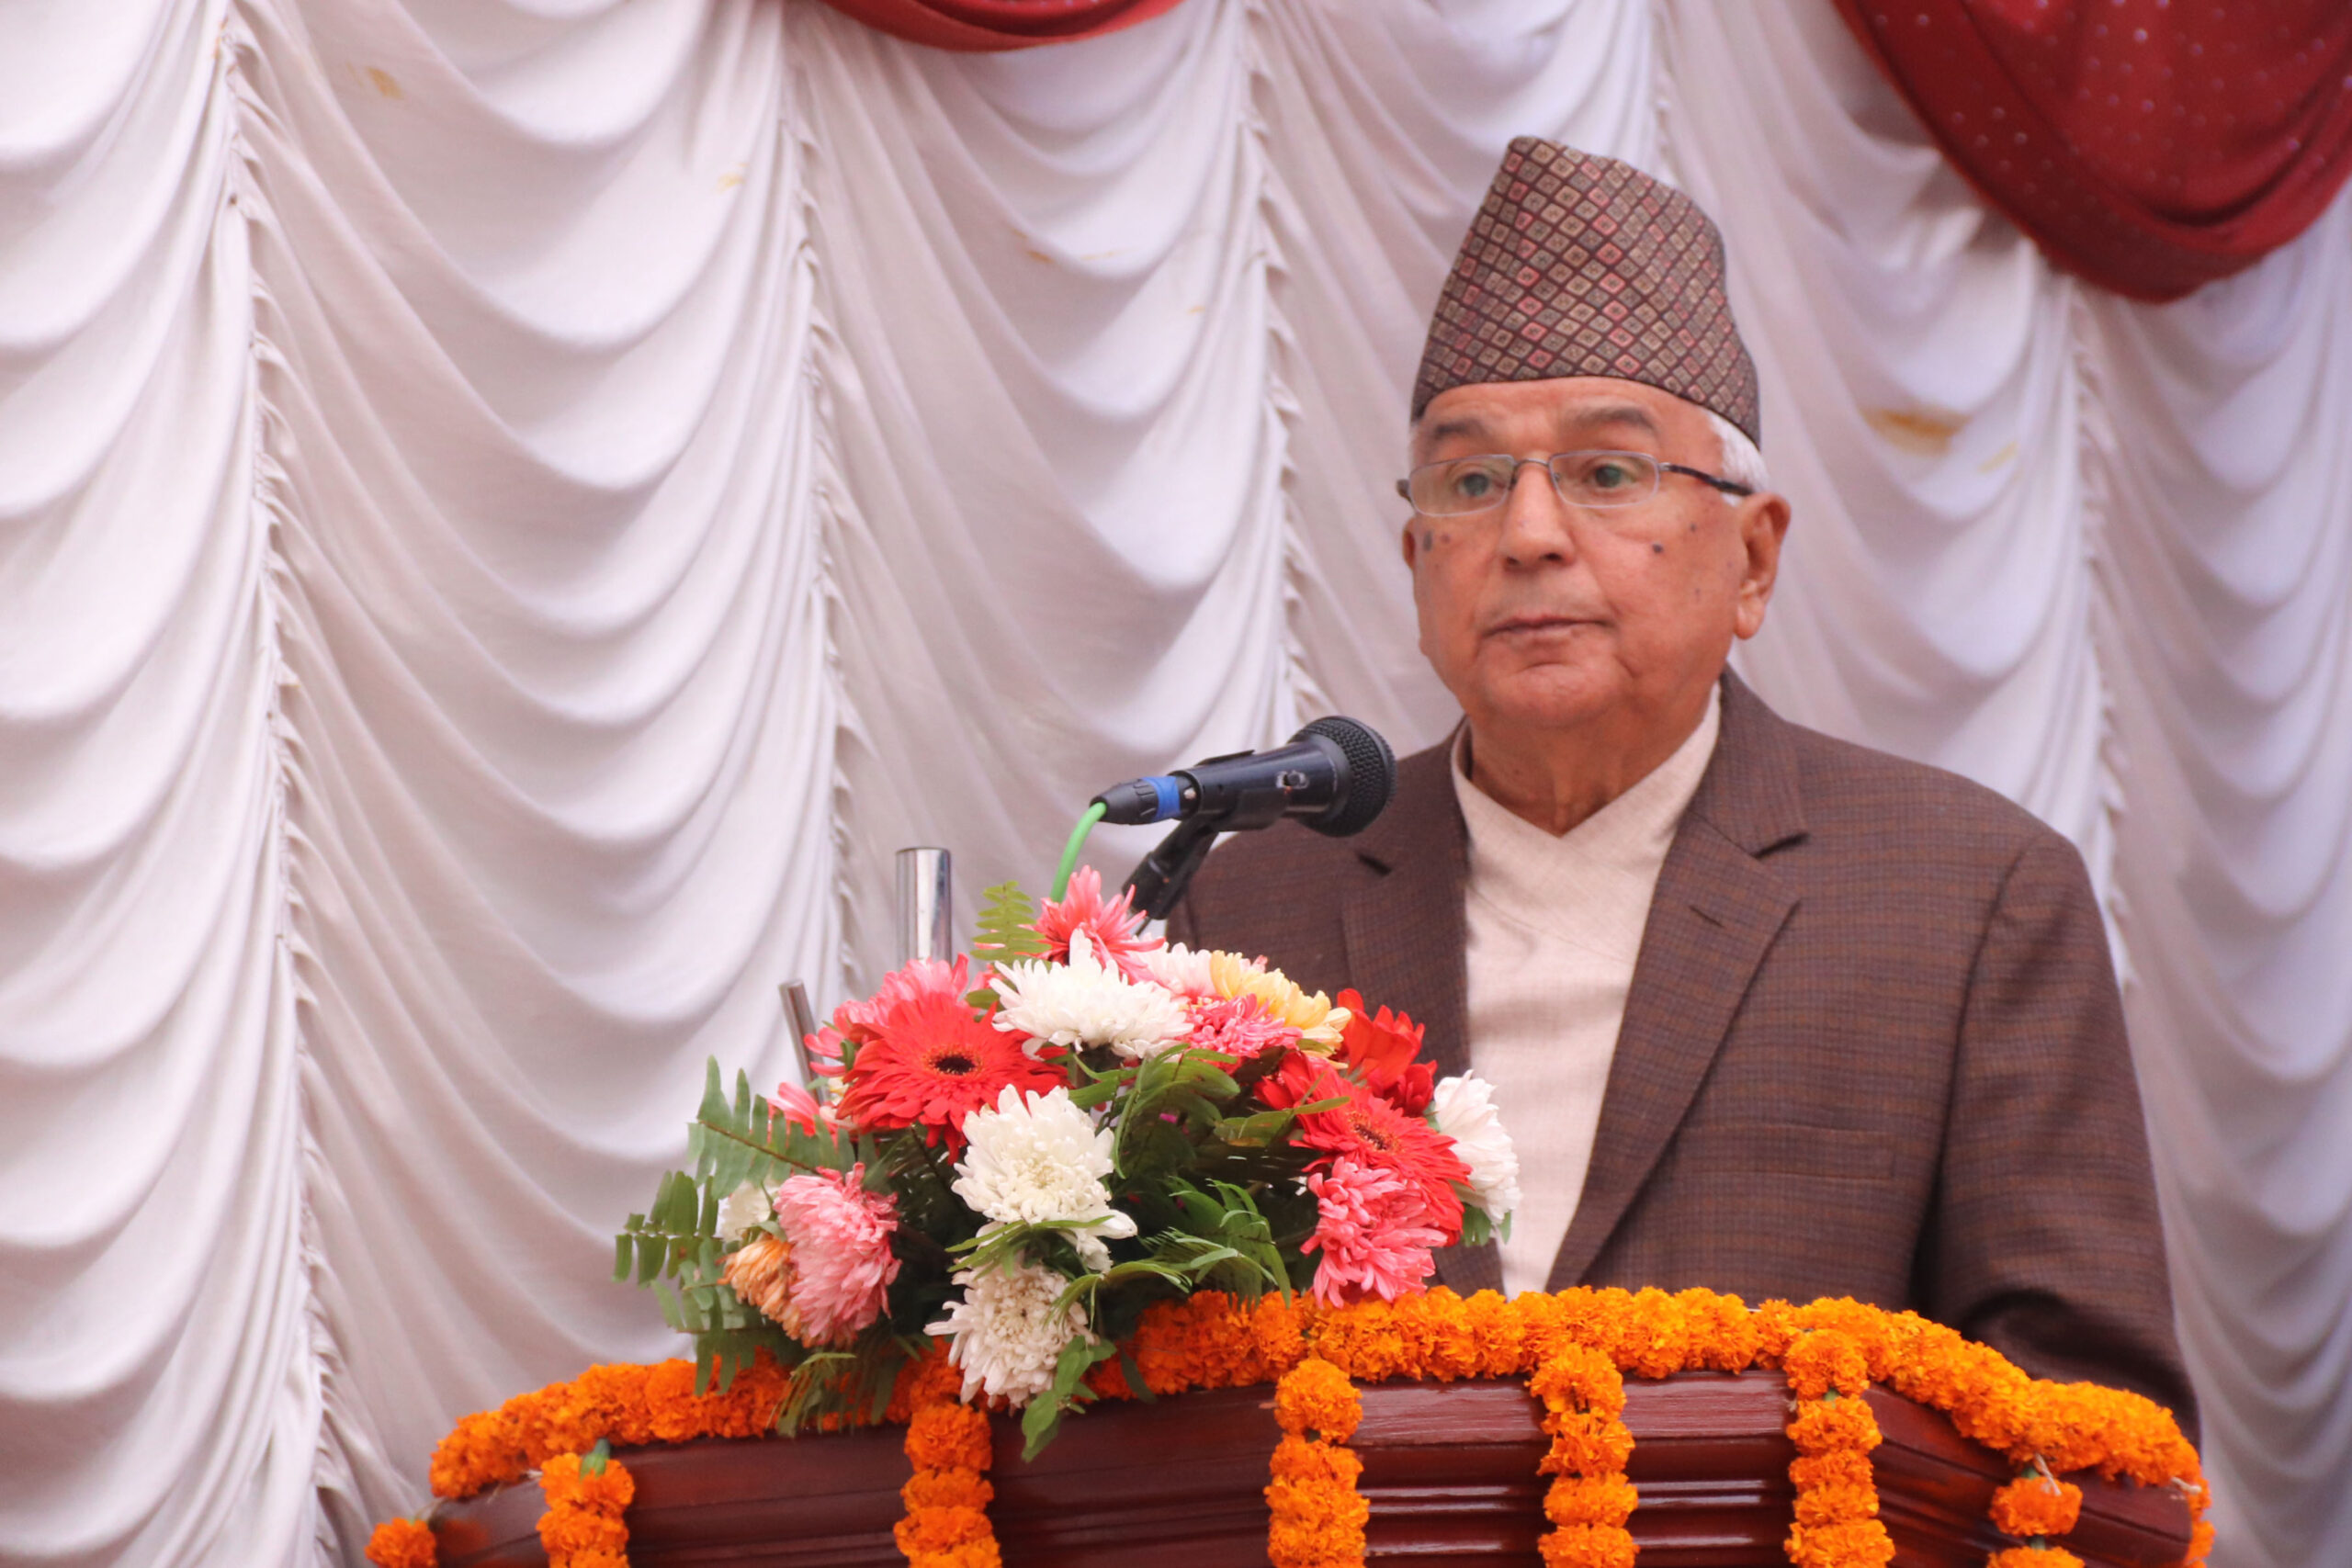 President Paudel’s concerns shine light on national issues